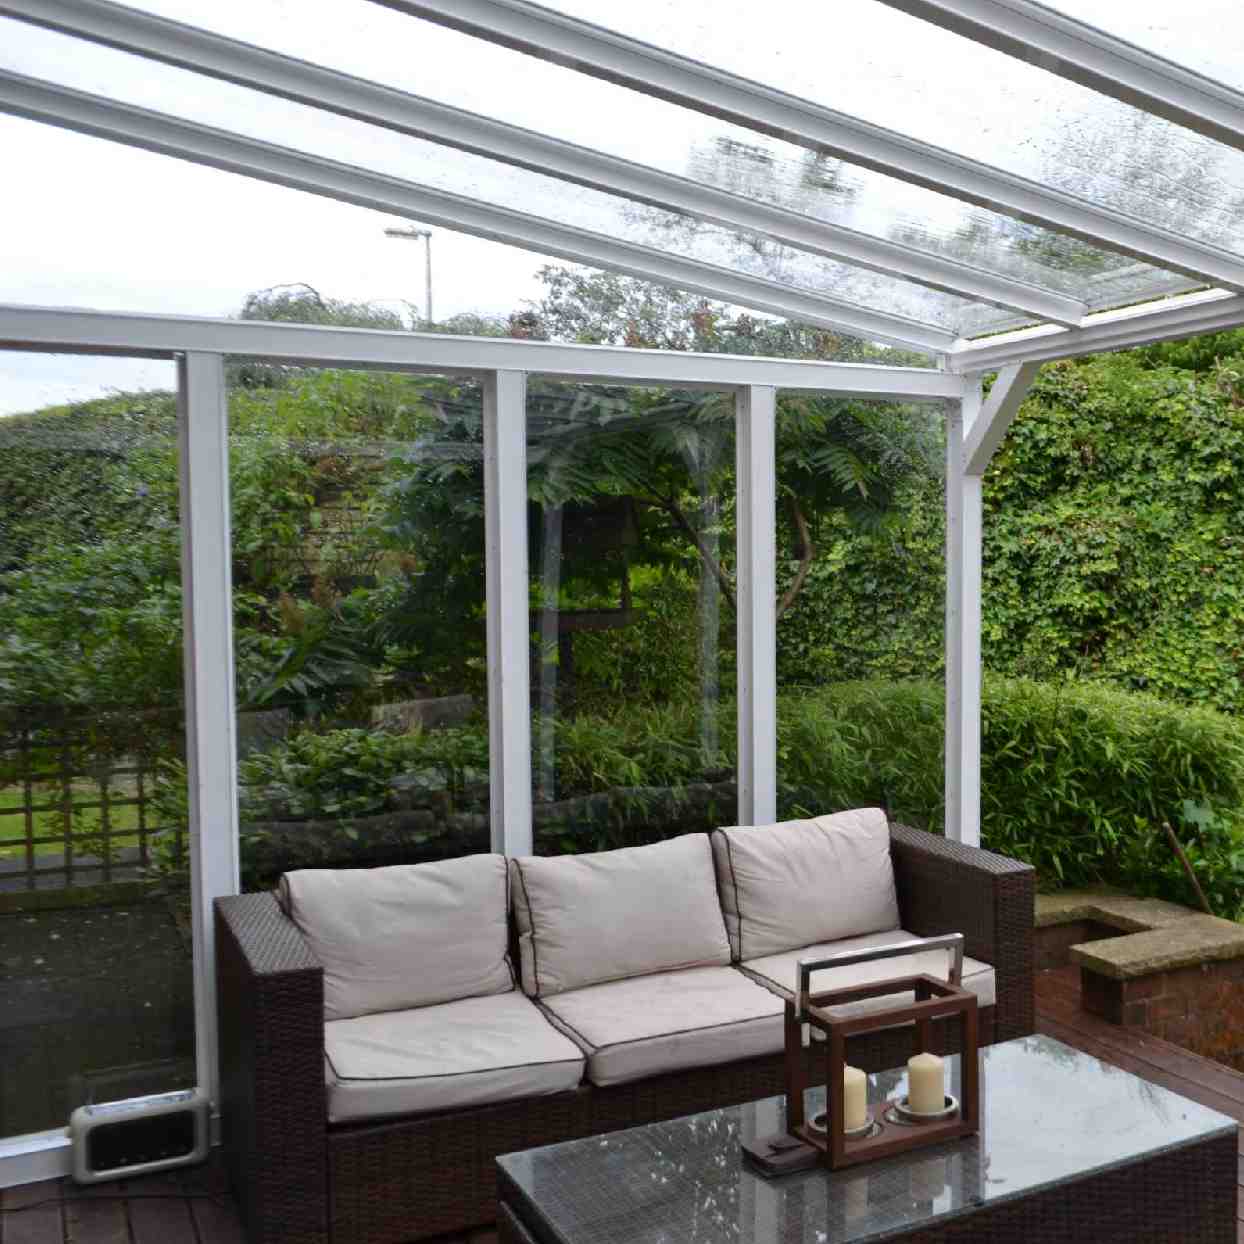 Buy Omega Verandah White with 6mm Glass Clear Plate Polycarbonate Glazing - 10.0m (W) x 4.0m (P), (5) Supporting Posts online today